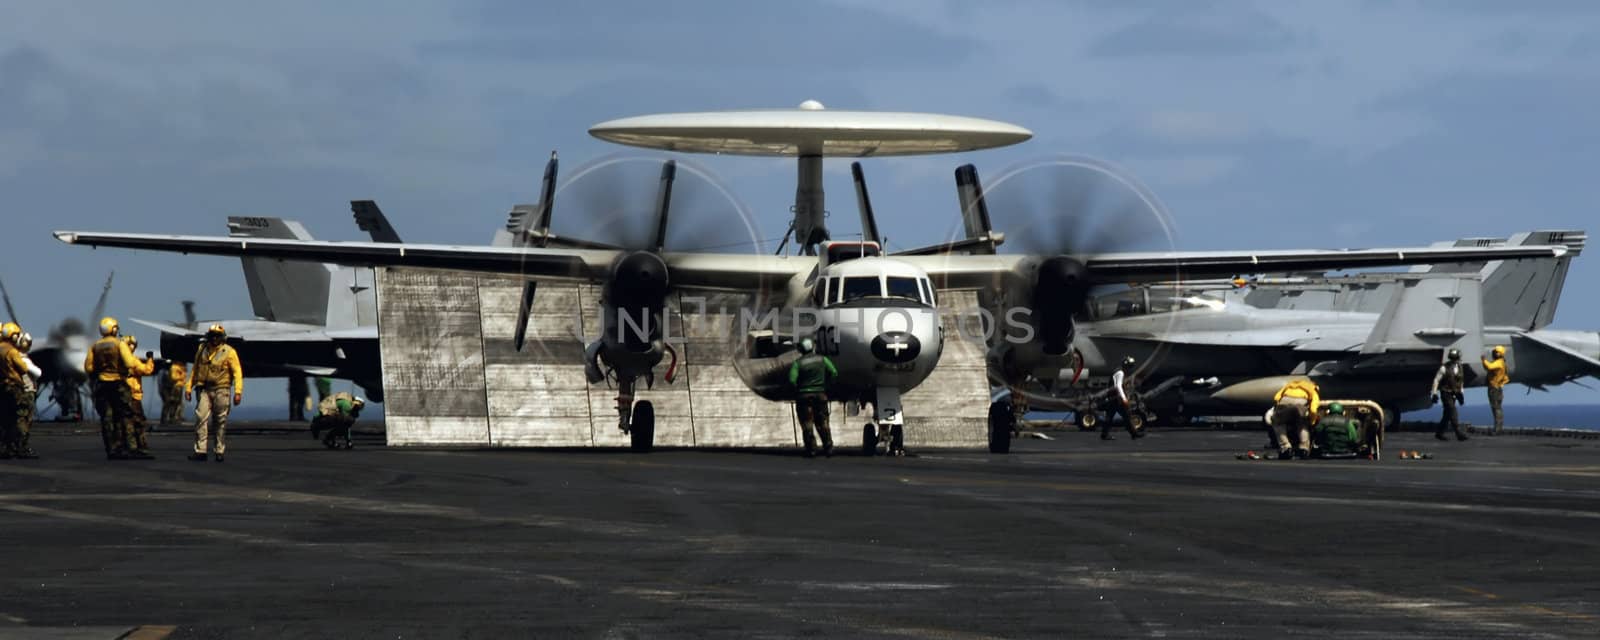 An E-2C Hawkeye prepares to launch from a busy aircraft carrier deck